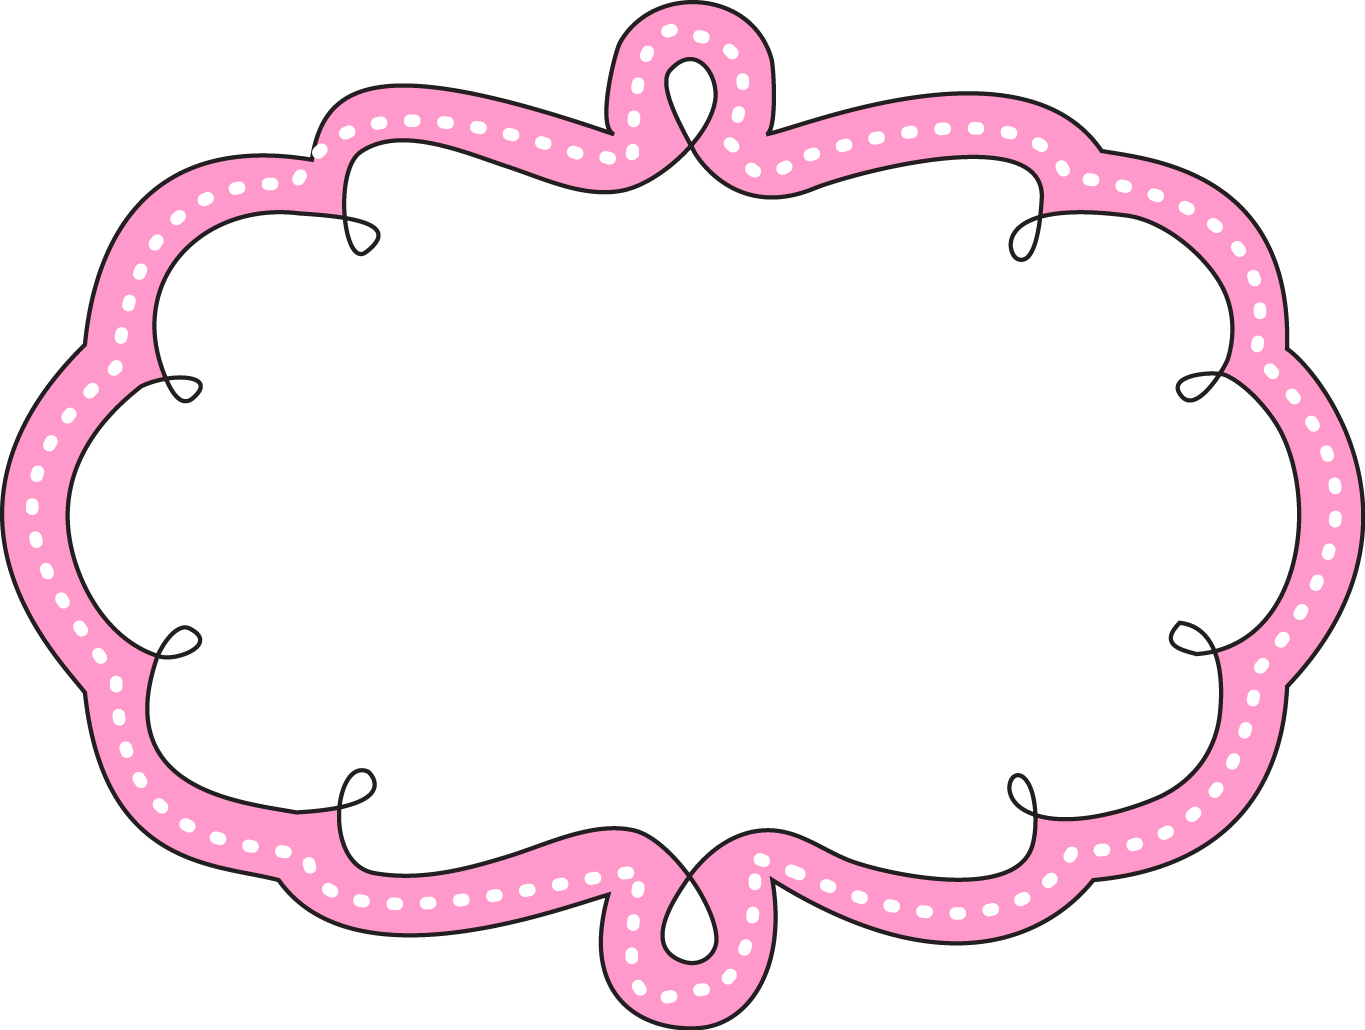 Download Doodle Frames Cute Frames Name Labels Borders And Borders And Frames Png Image With No Background Pngkey Com